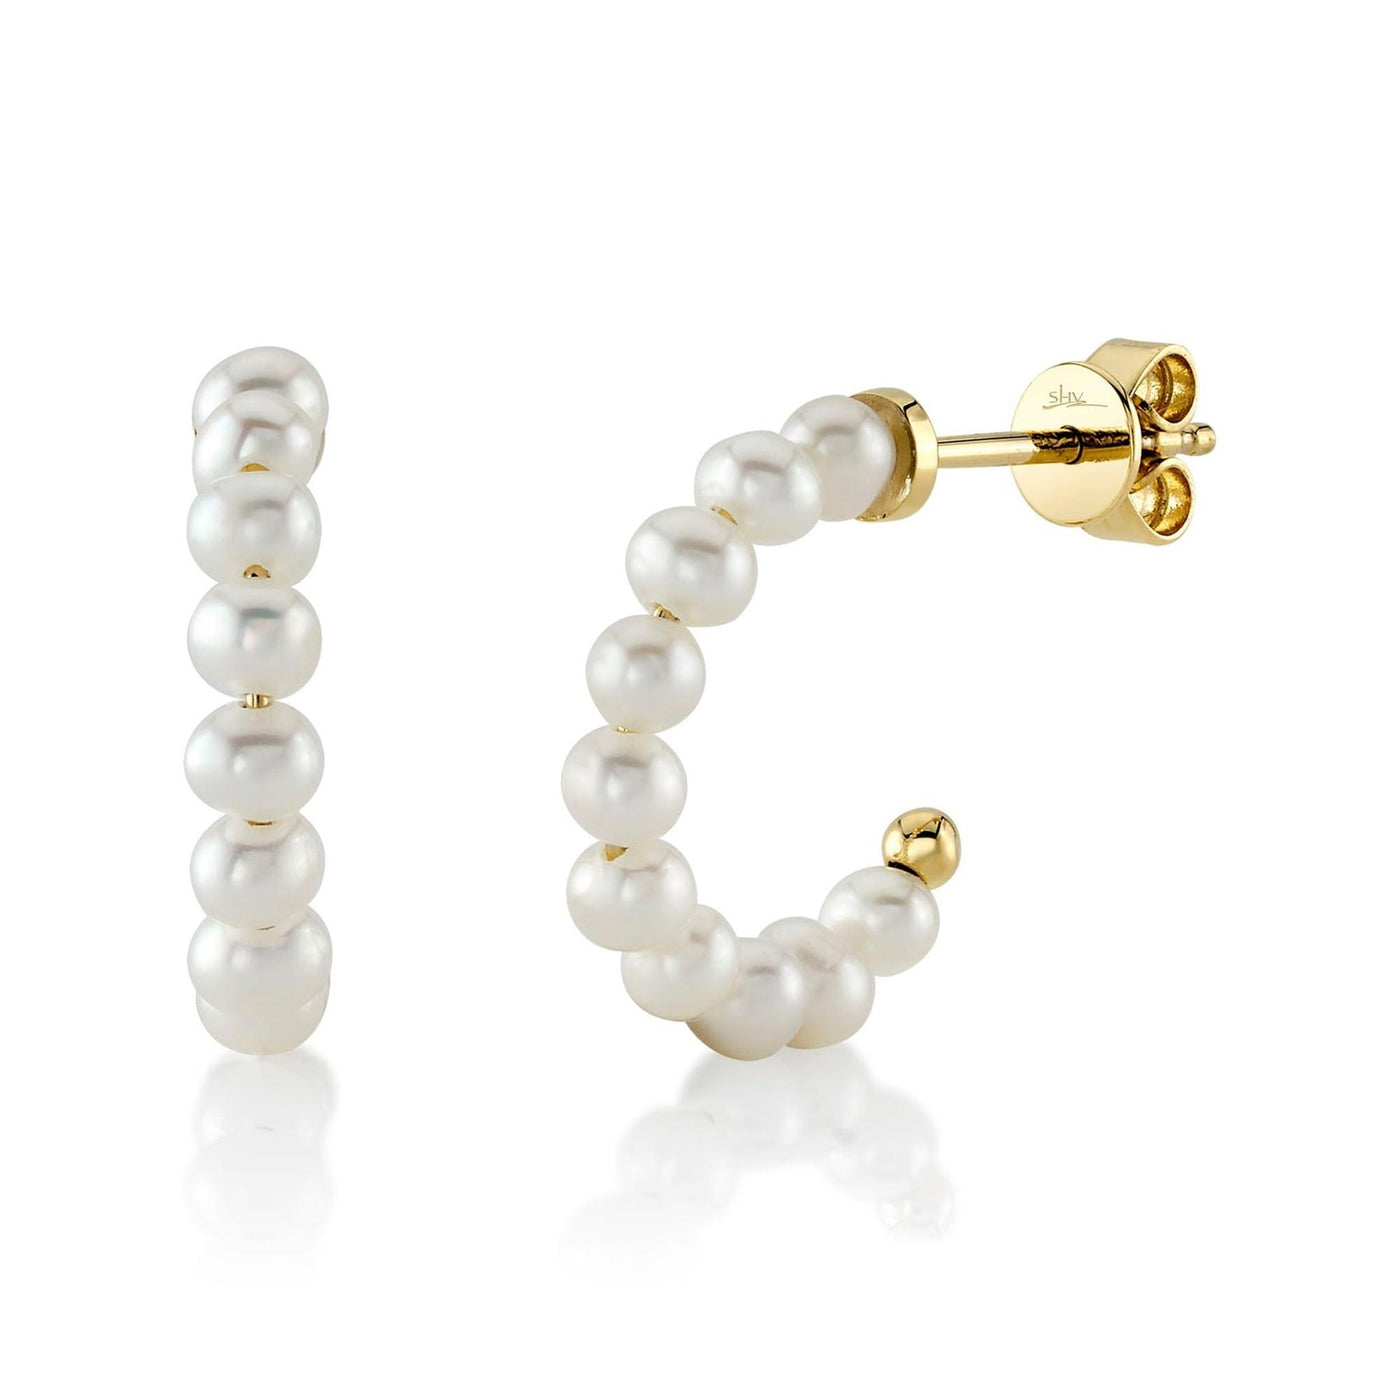 Shy Creation 14K Yellow Gold Fancy Hoop Style Earrings Featuring Cultured Pearls